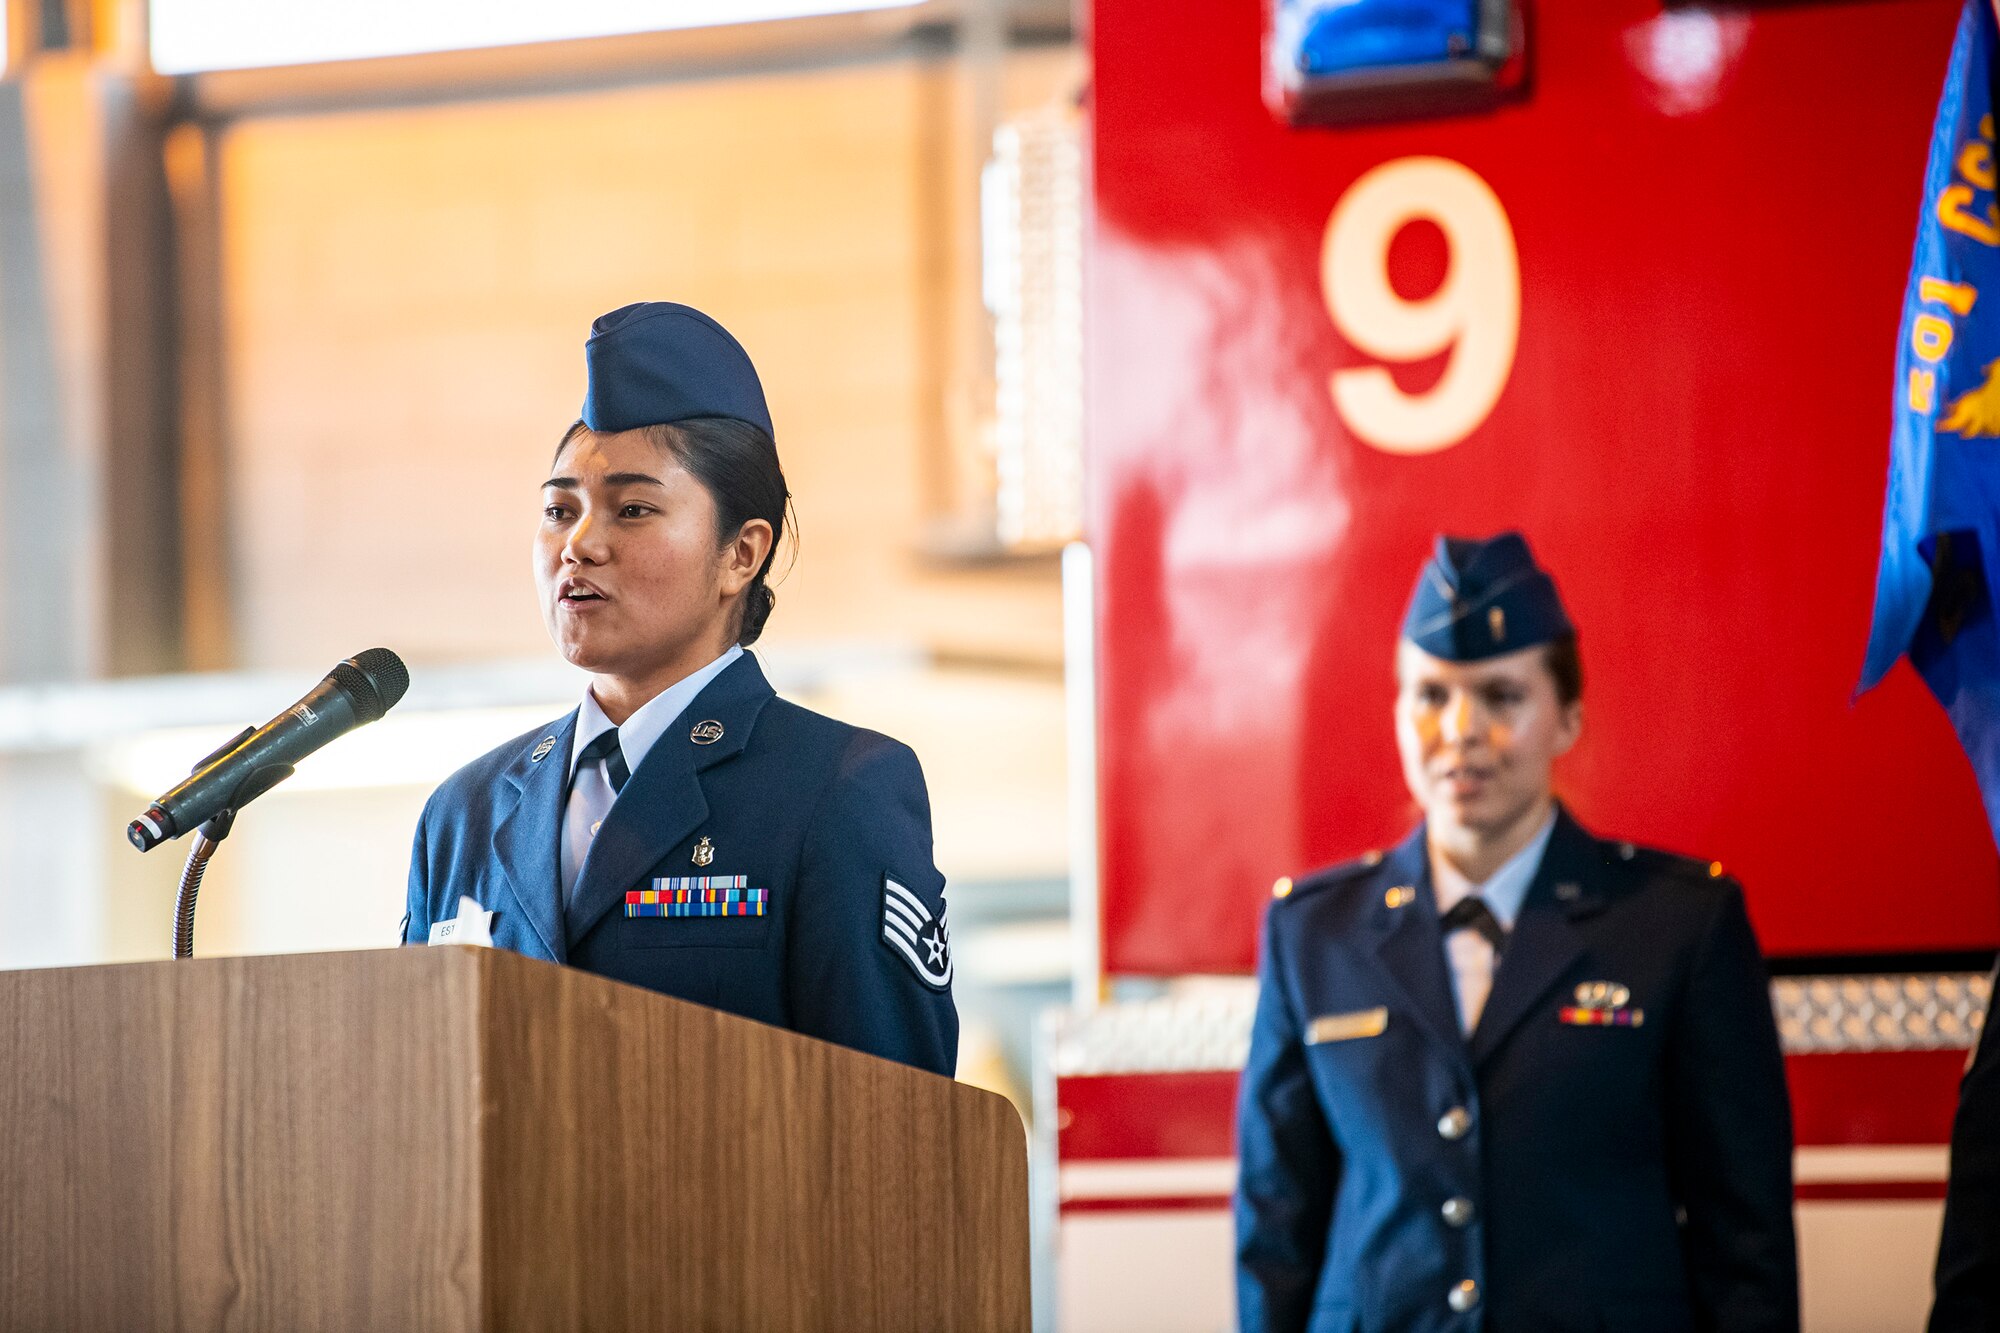 U.S. Air Force Staff Sgt. Bloom Esteller, left, 423d Medical Squadron dental assistant, sings the Air Force song at the conclusion of a change of command ceremony at RAF Alconbury, England, July 25, 2022. The ceremony is a military tradition that represents a formal transfer of a unit’s authority from one commander to another. (U.S. Air Force photo by Staff Sgt. Eugene Oliver)